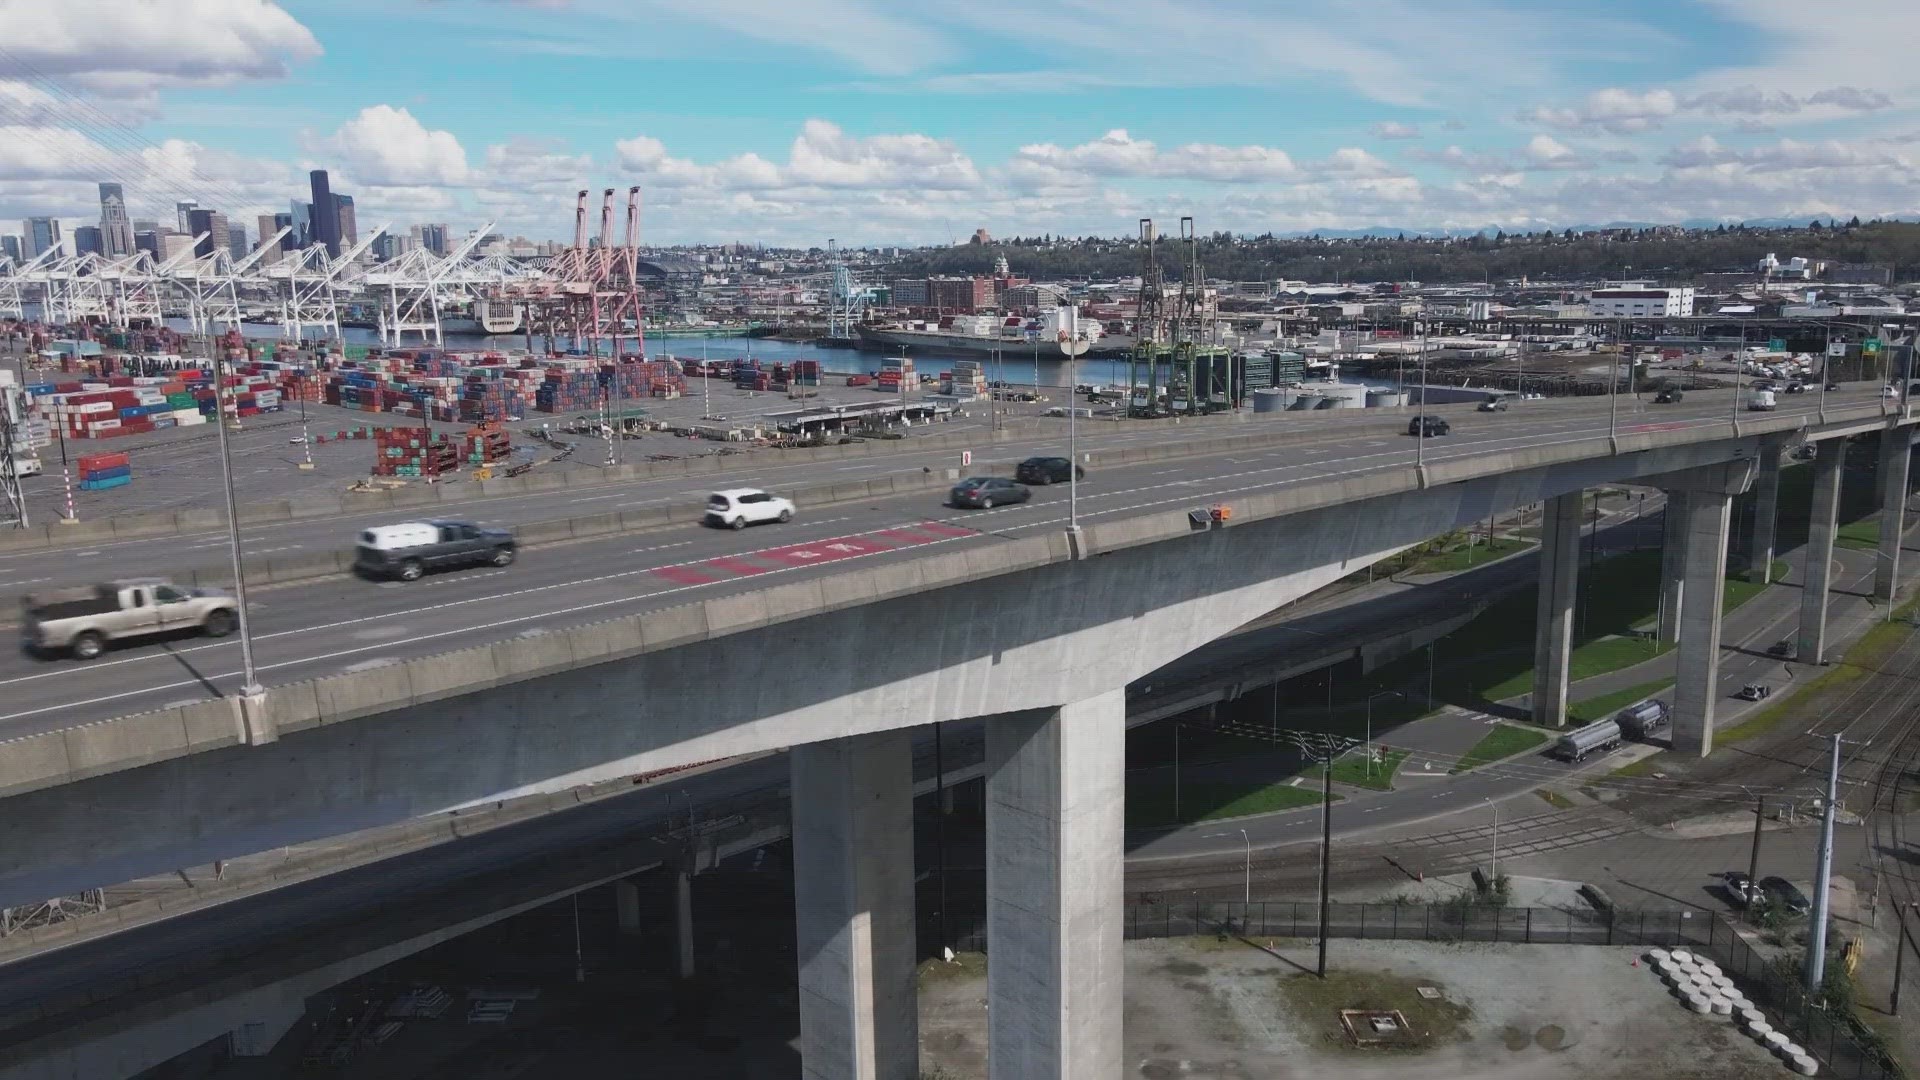 Seattle City Councilmember and Transportation Chair Rob Saka said he is going to find more funding to address Seattle's aging bridges.